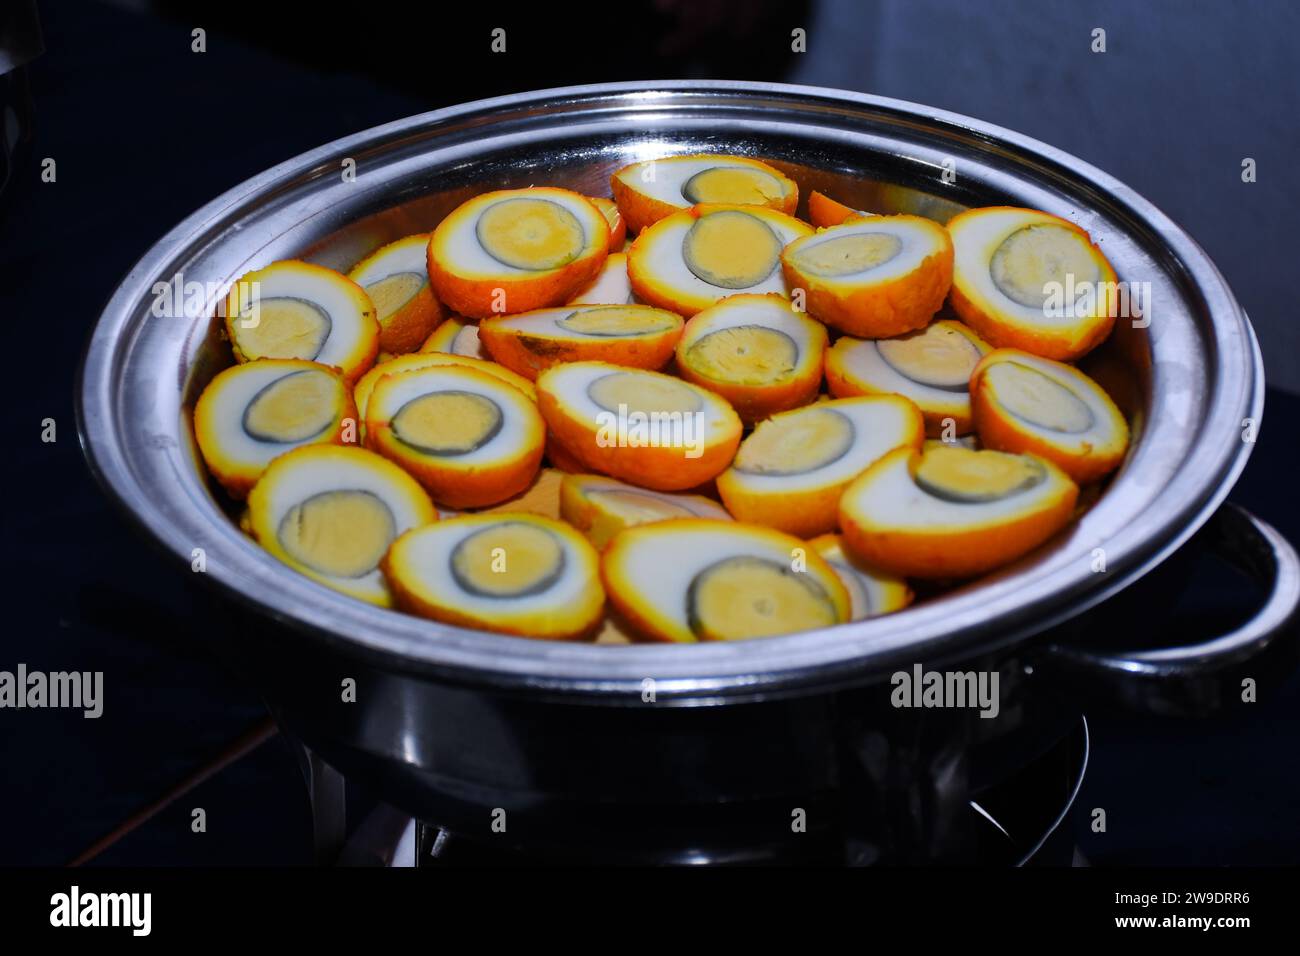 Hard-boiled chicken eggs cut into halves for food in Buffet Stock Photo